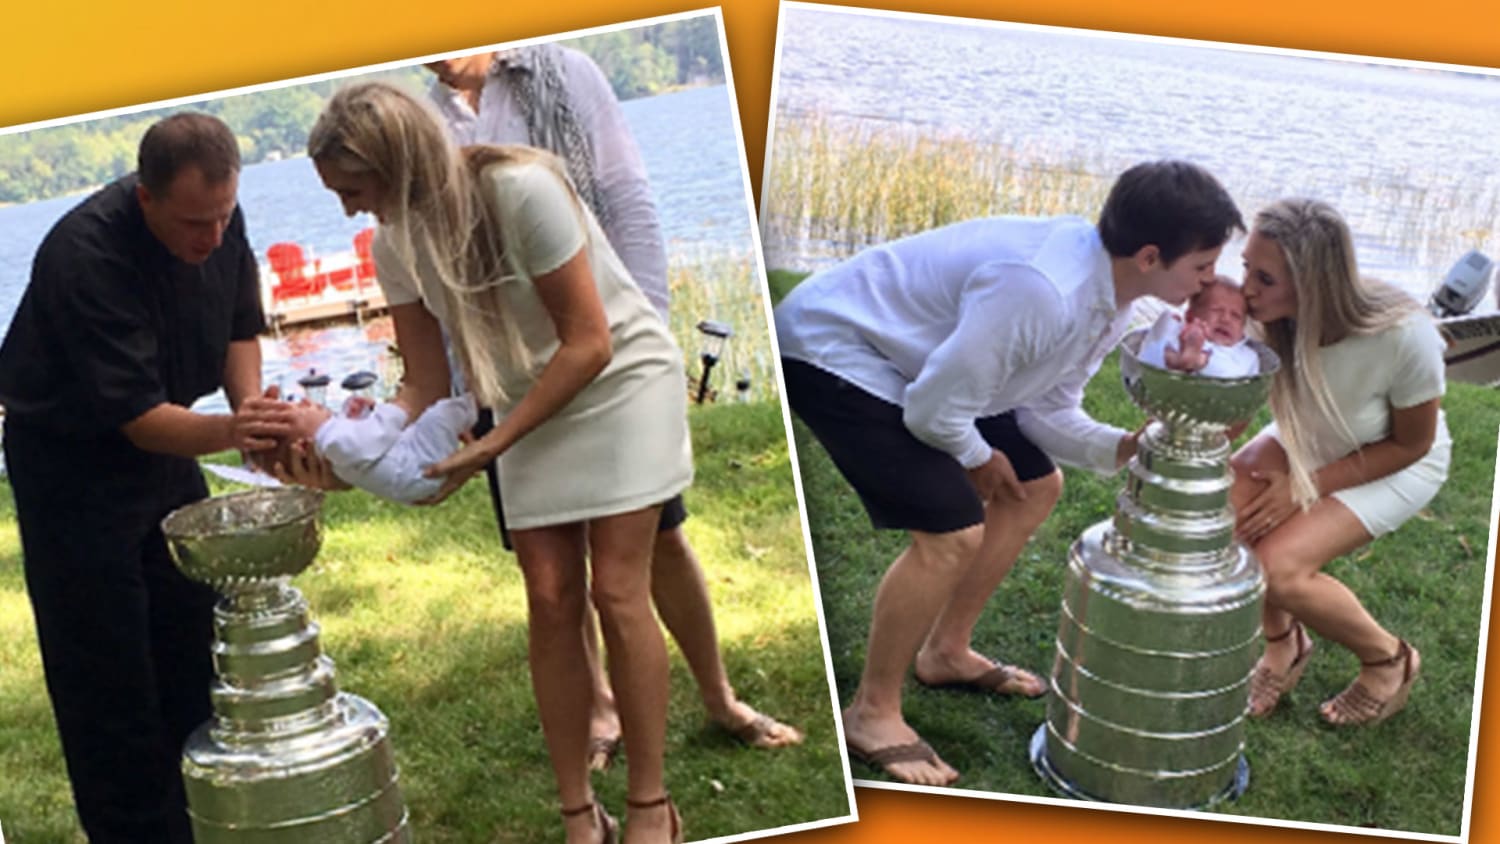 https://media-cldnry.s-nbcnews.com/image/upload/newscms/2017_35/1279671/baptized-child-stanley-cup-today-tease-170901.jpg